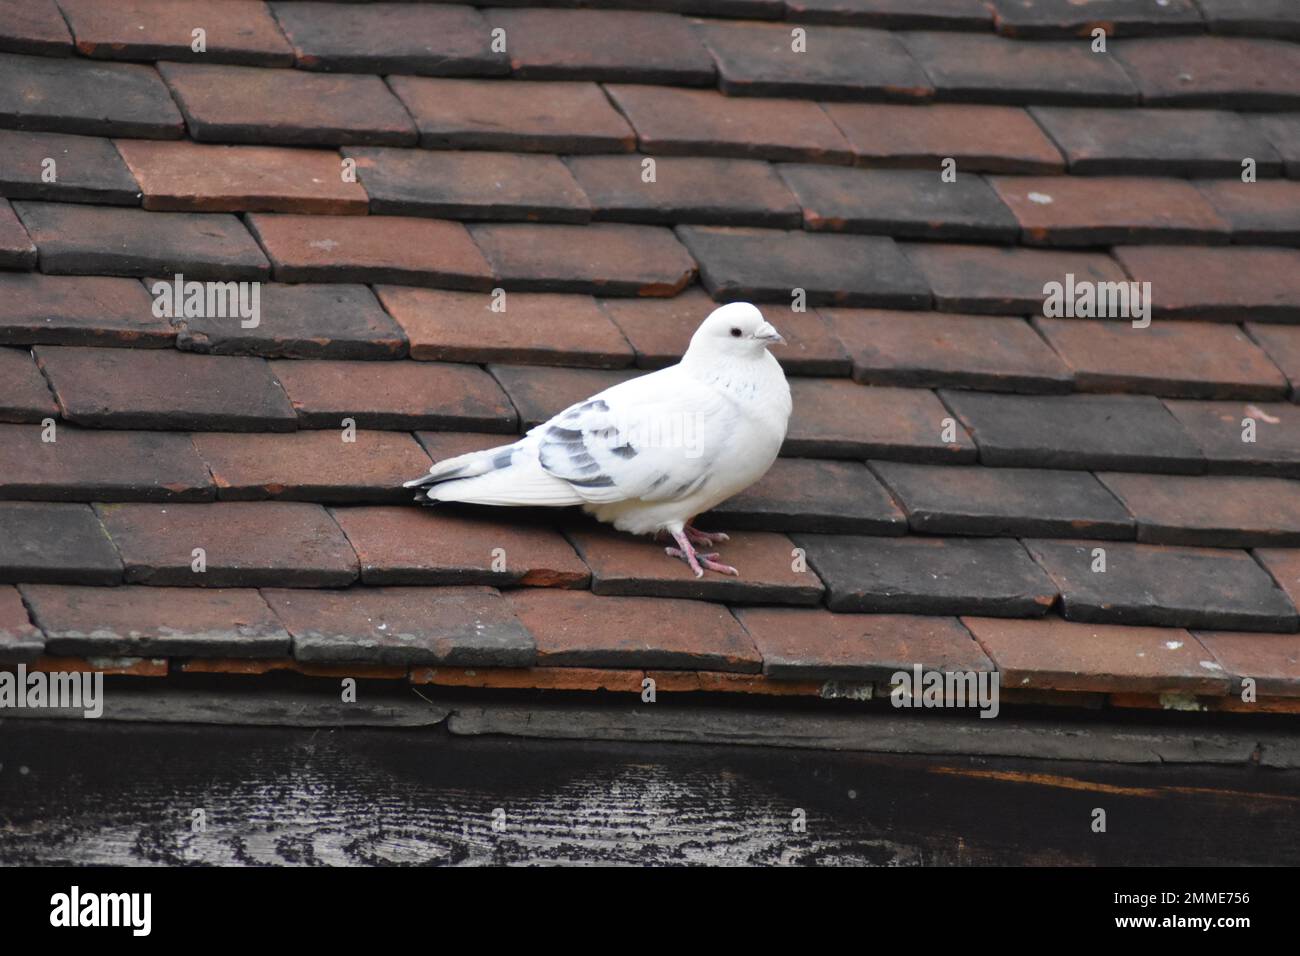 White pigeon on a tiled roof with copy space. Stock Photo